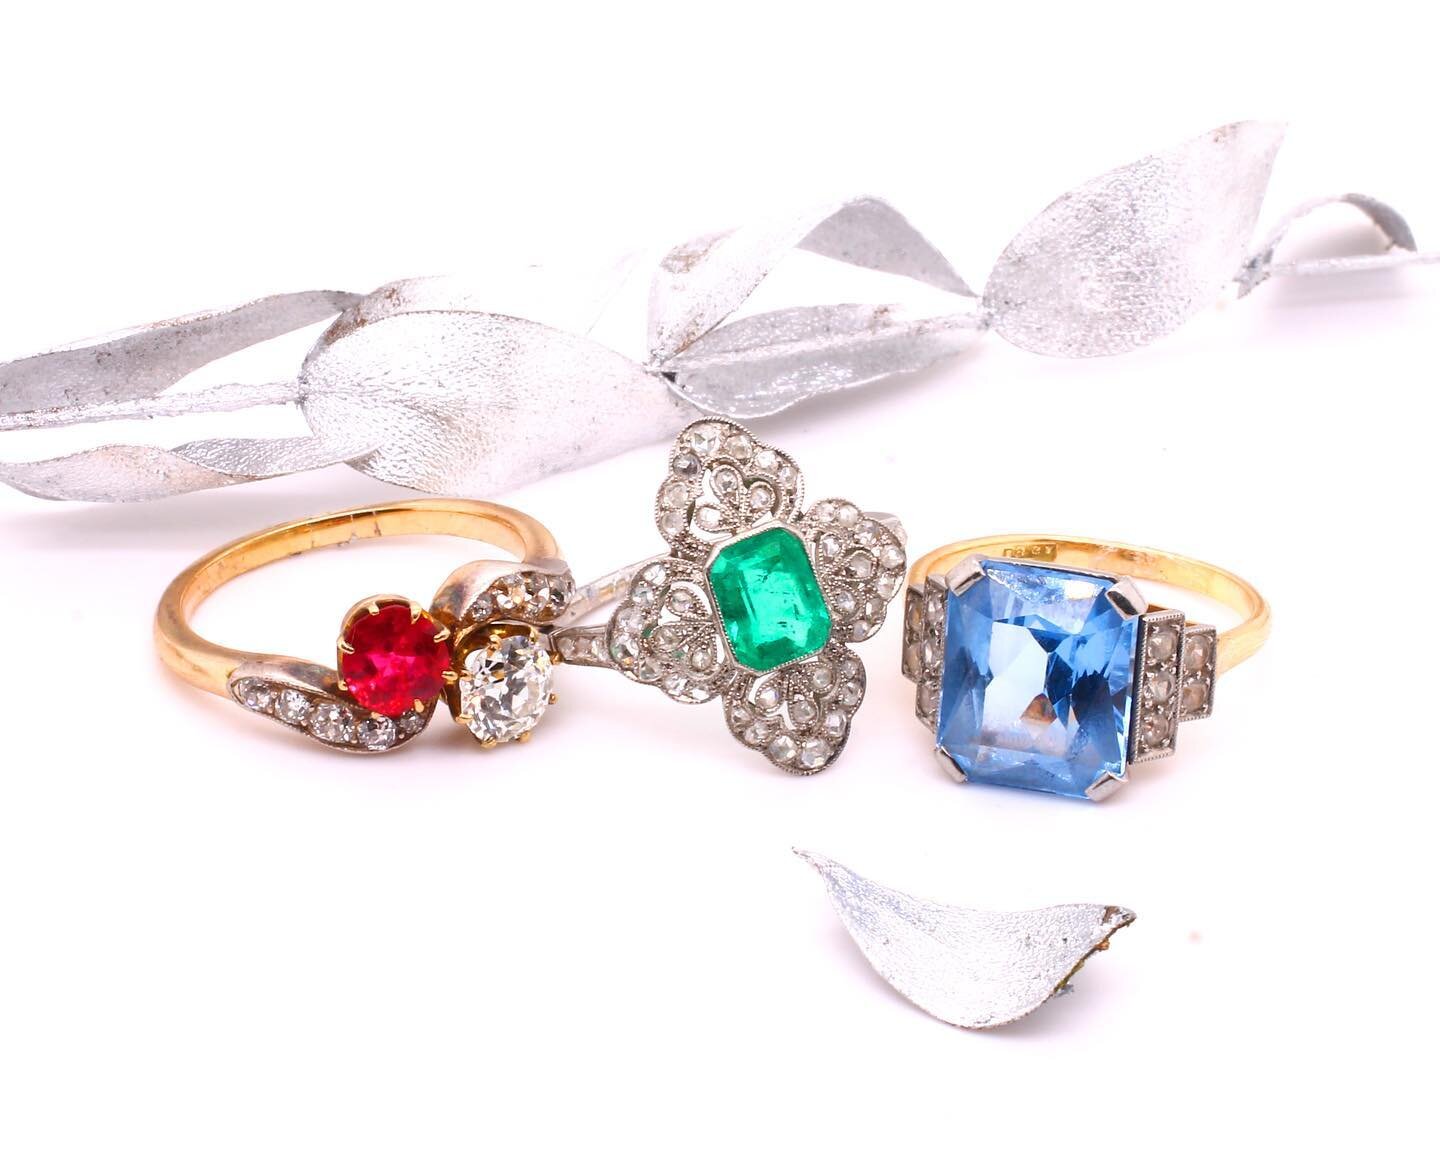 We have a wide selection of antique engagement and cocktail rings. Come and visit the shop in Windsor we are open Tuesday - Saturday 10.30am-5.30pm #flaxmanjewels #engagementring #engagementrings #vintageengagementring #antiqueengagementring #windsor